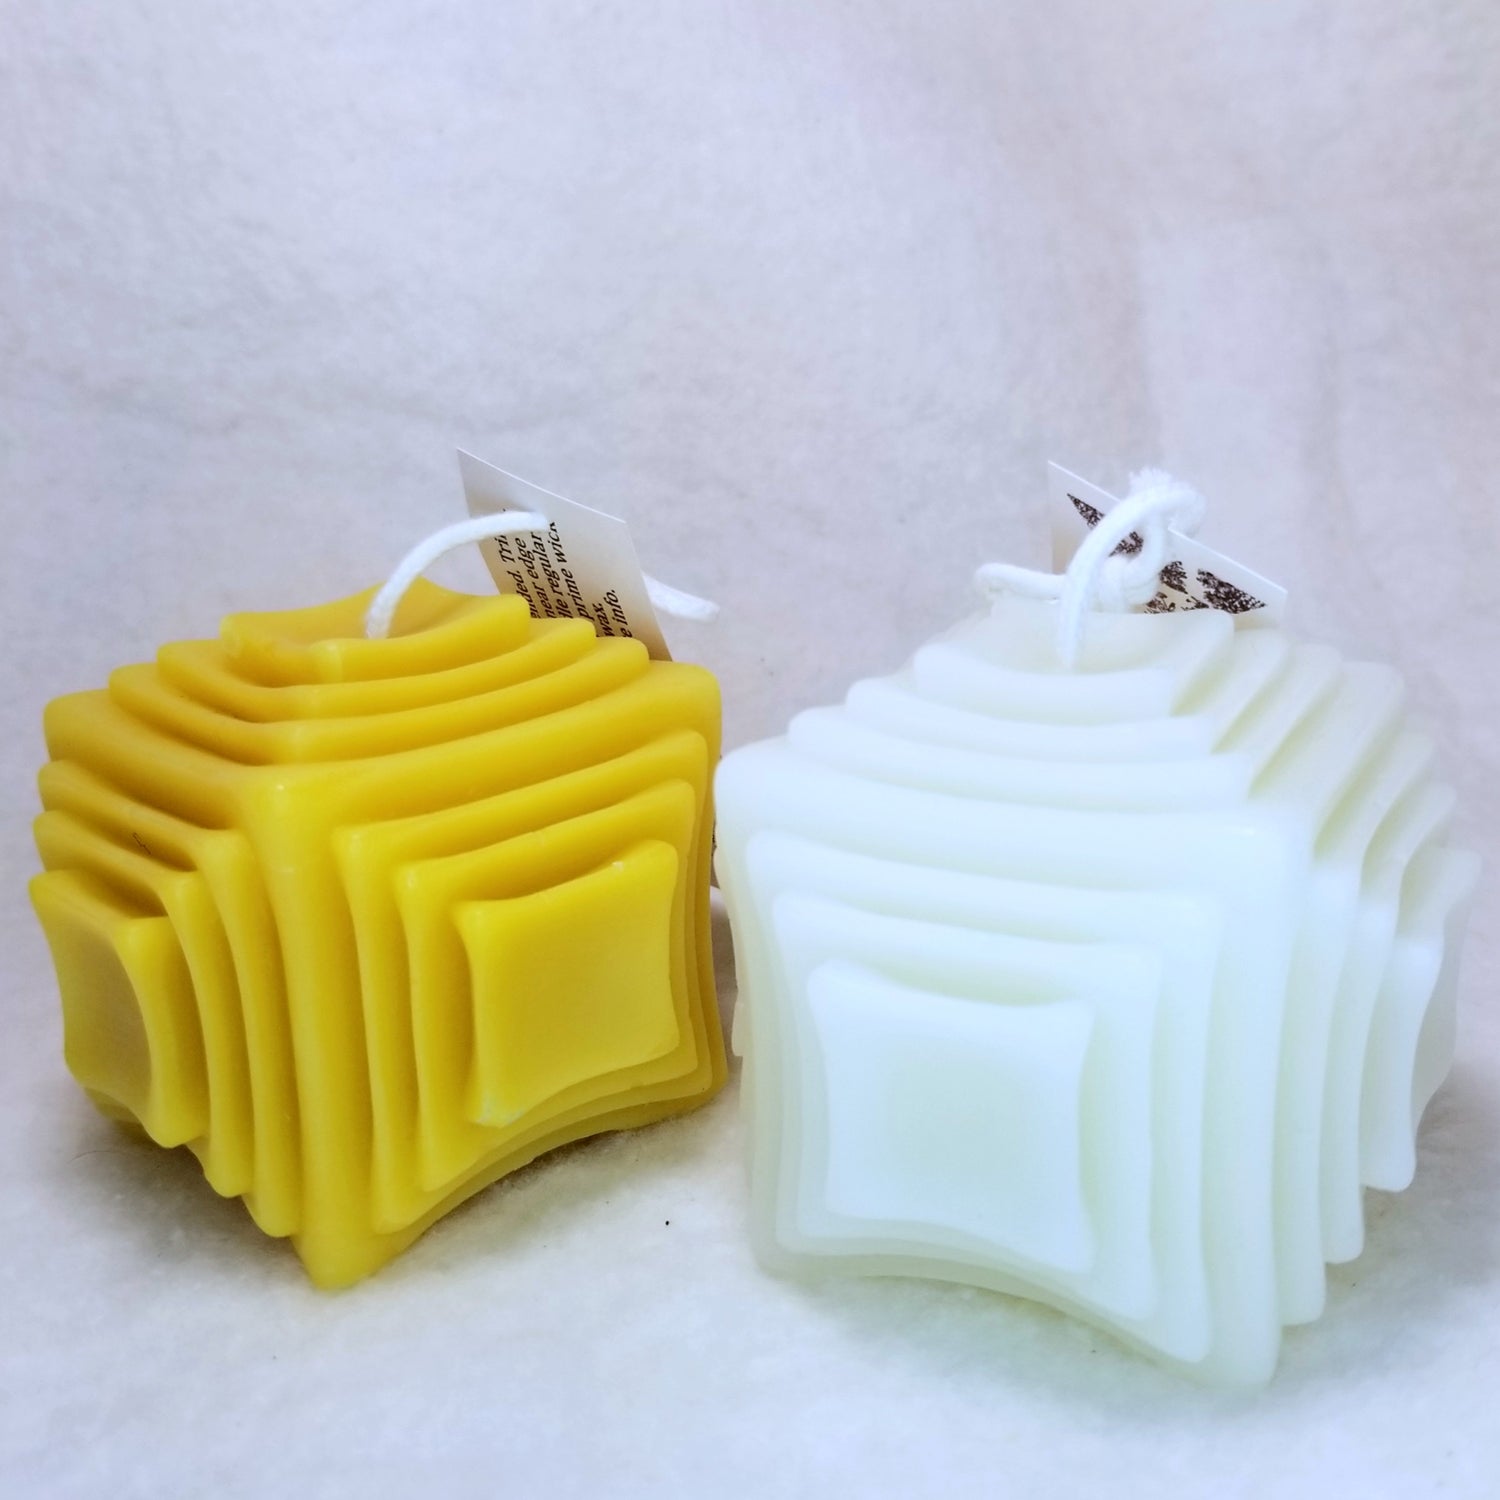 squares on squares pillar candle, pure beeswax, white or yellow, modern home decor